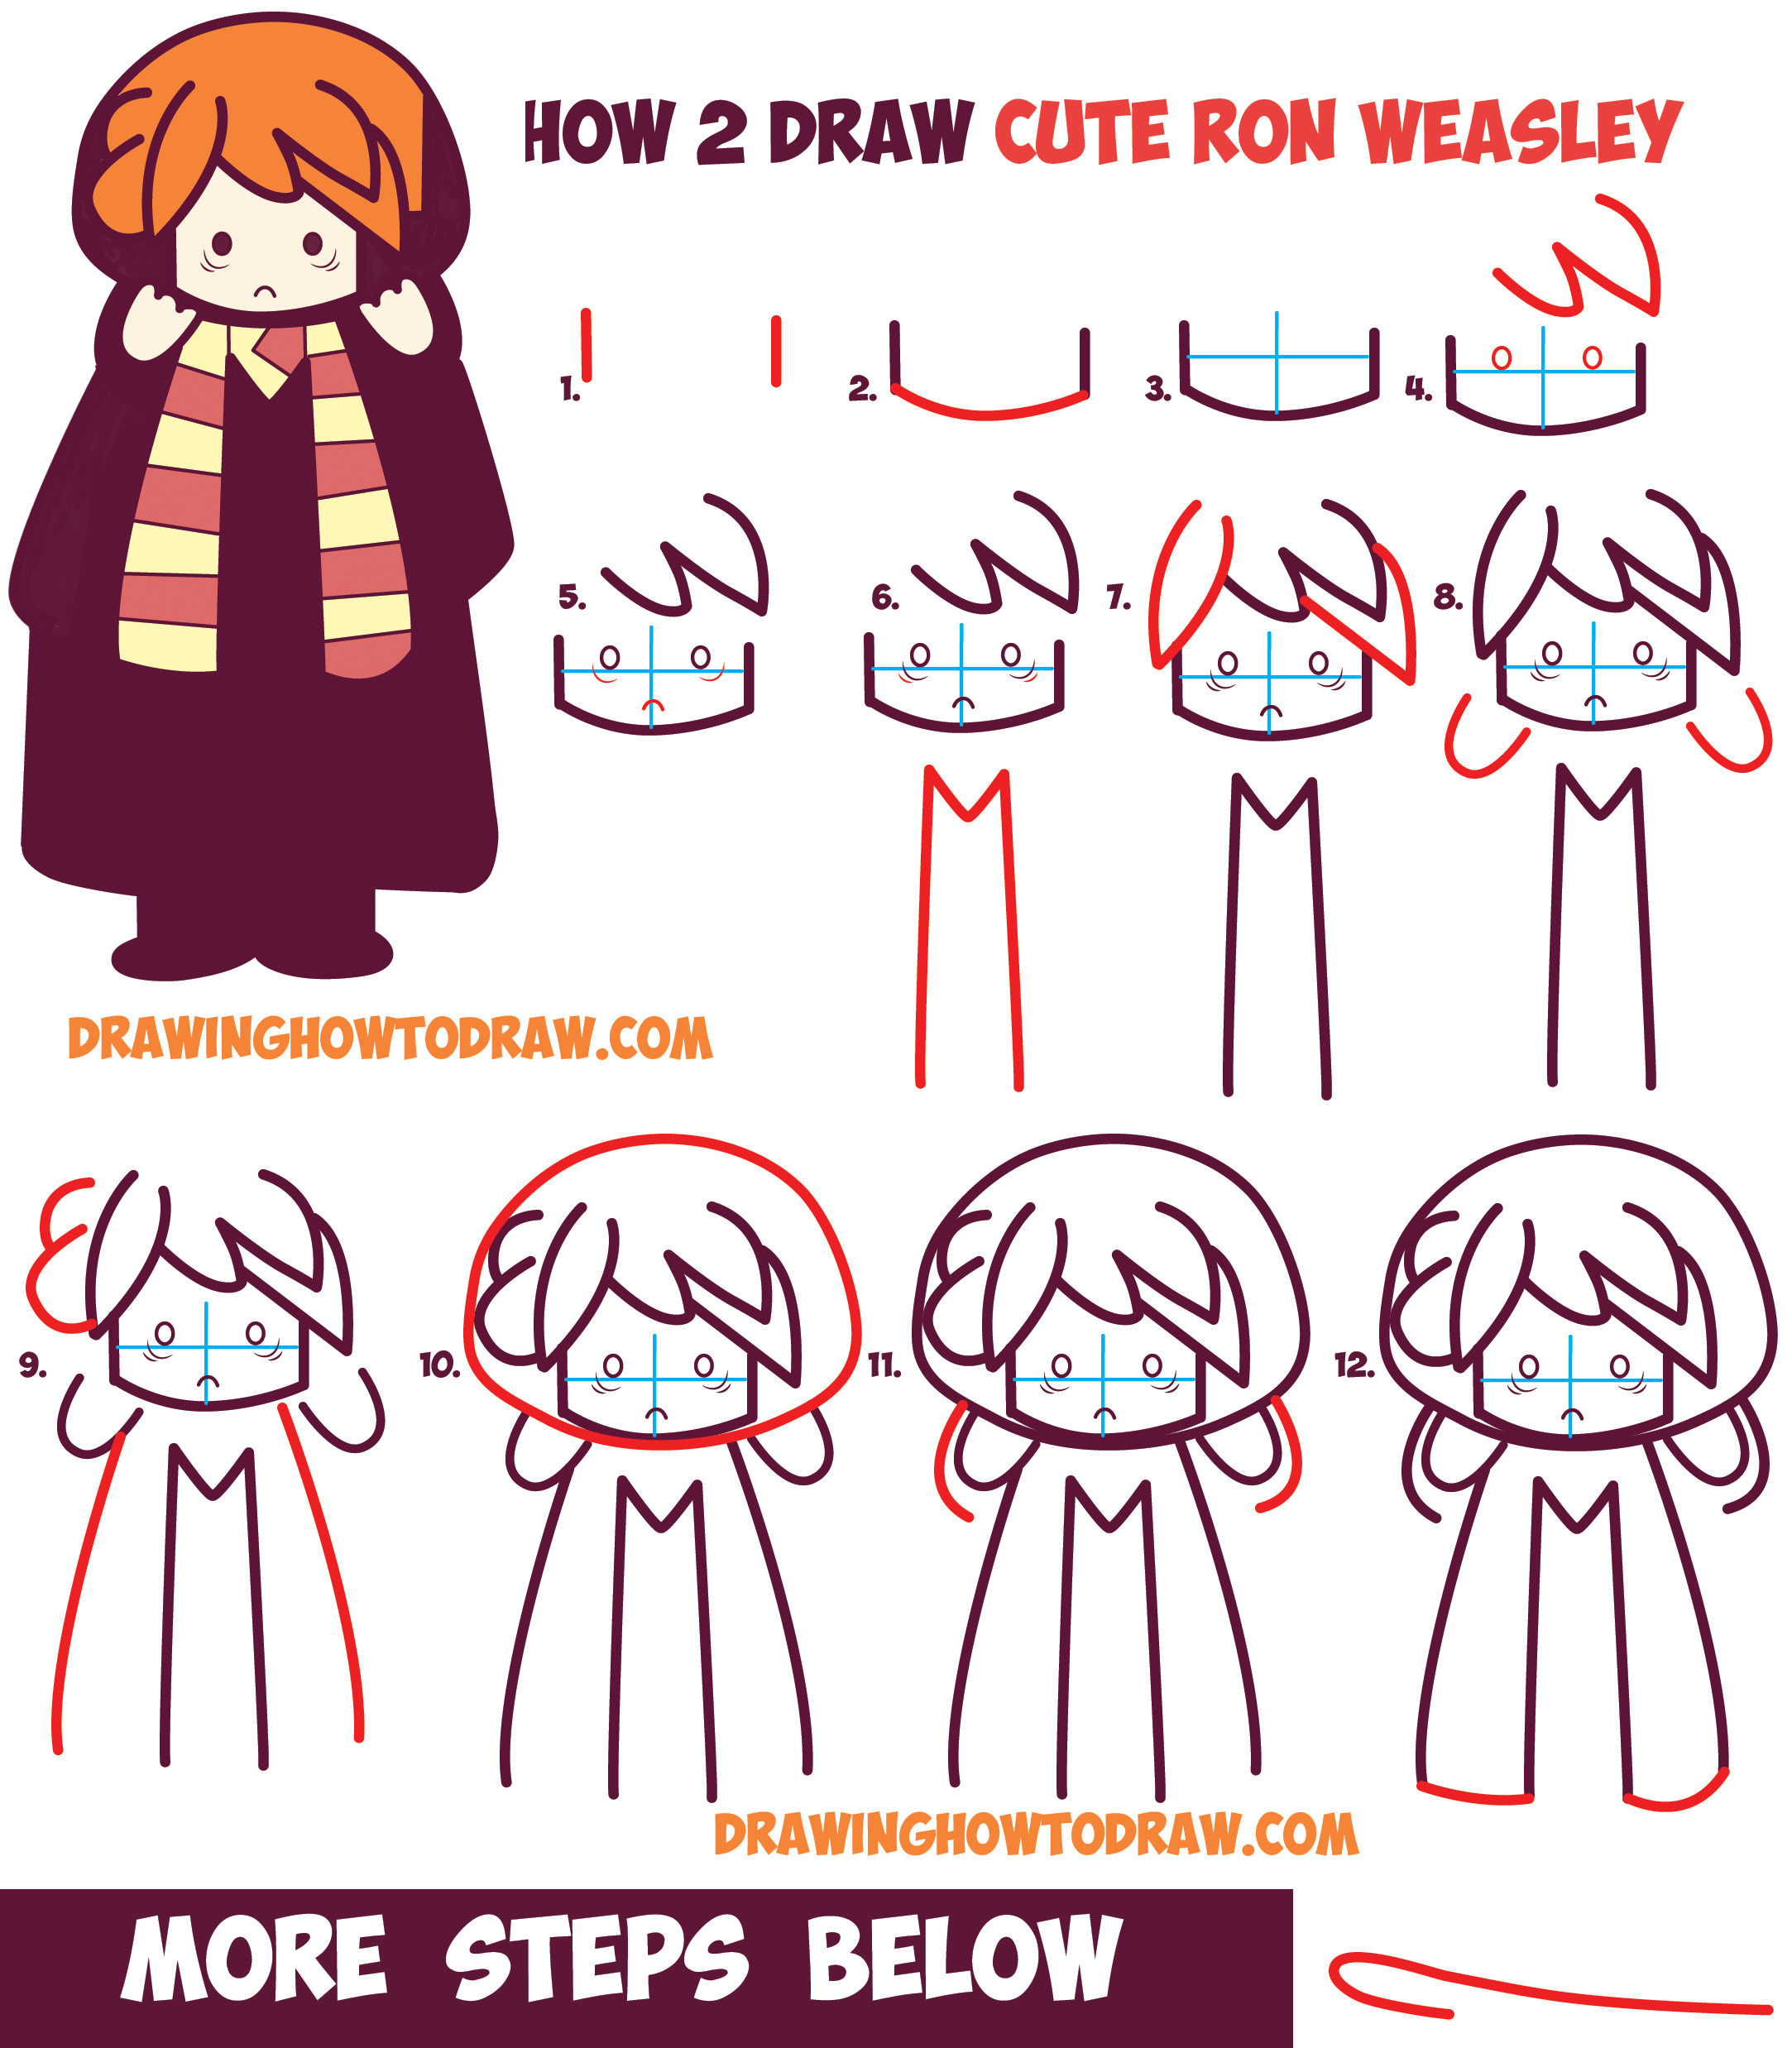 How to Draw Cute Ron Weasley from Harry Potter (Chibi / Kawaii) Easy Step by Step Drawing Tutorial